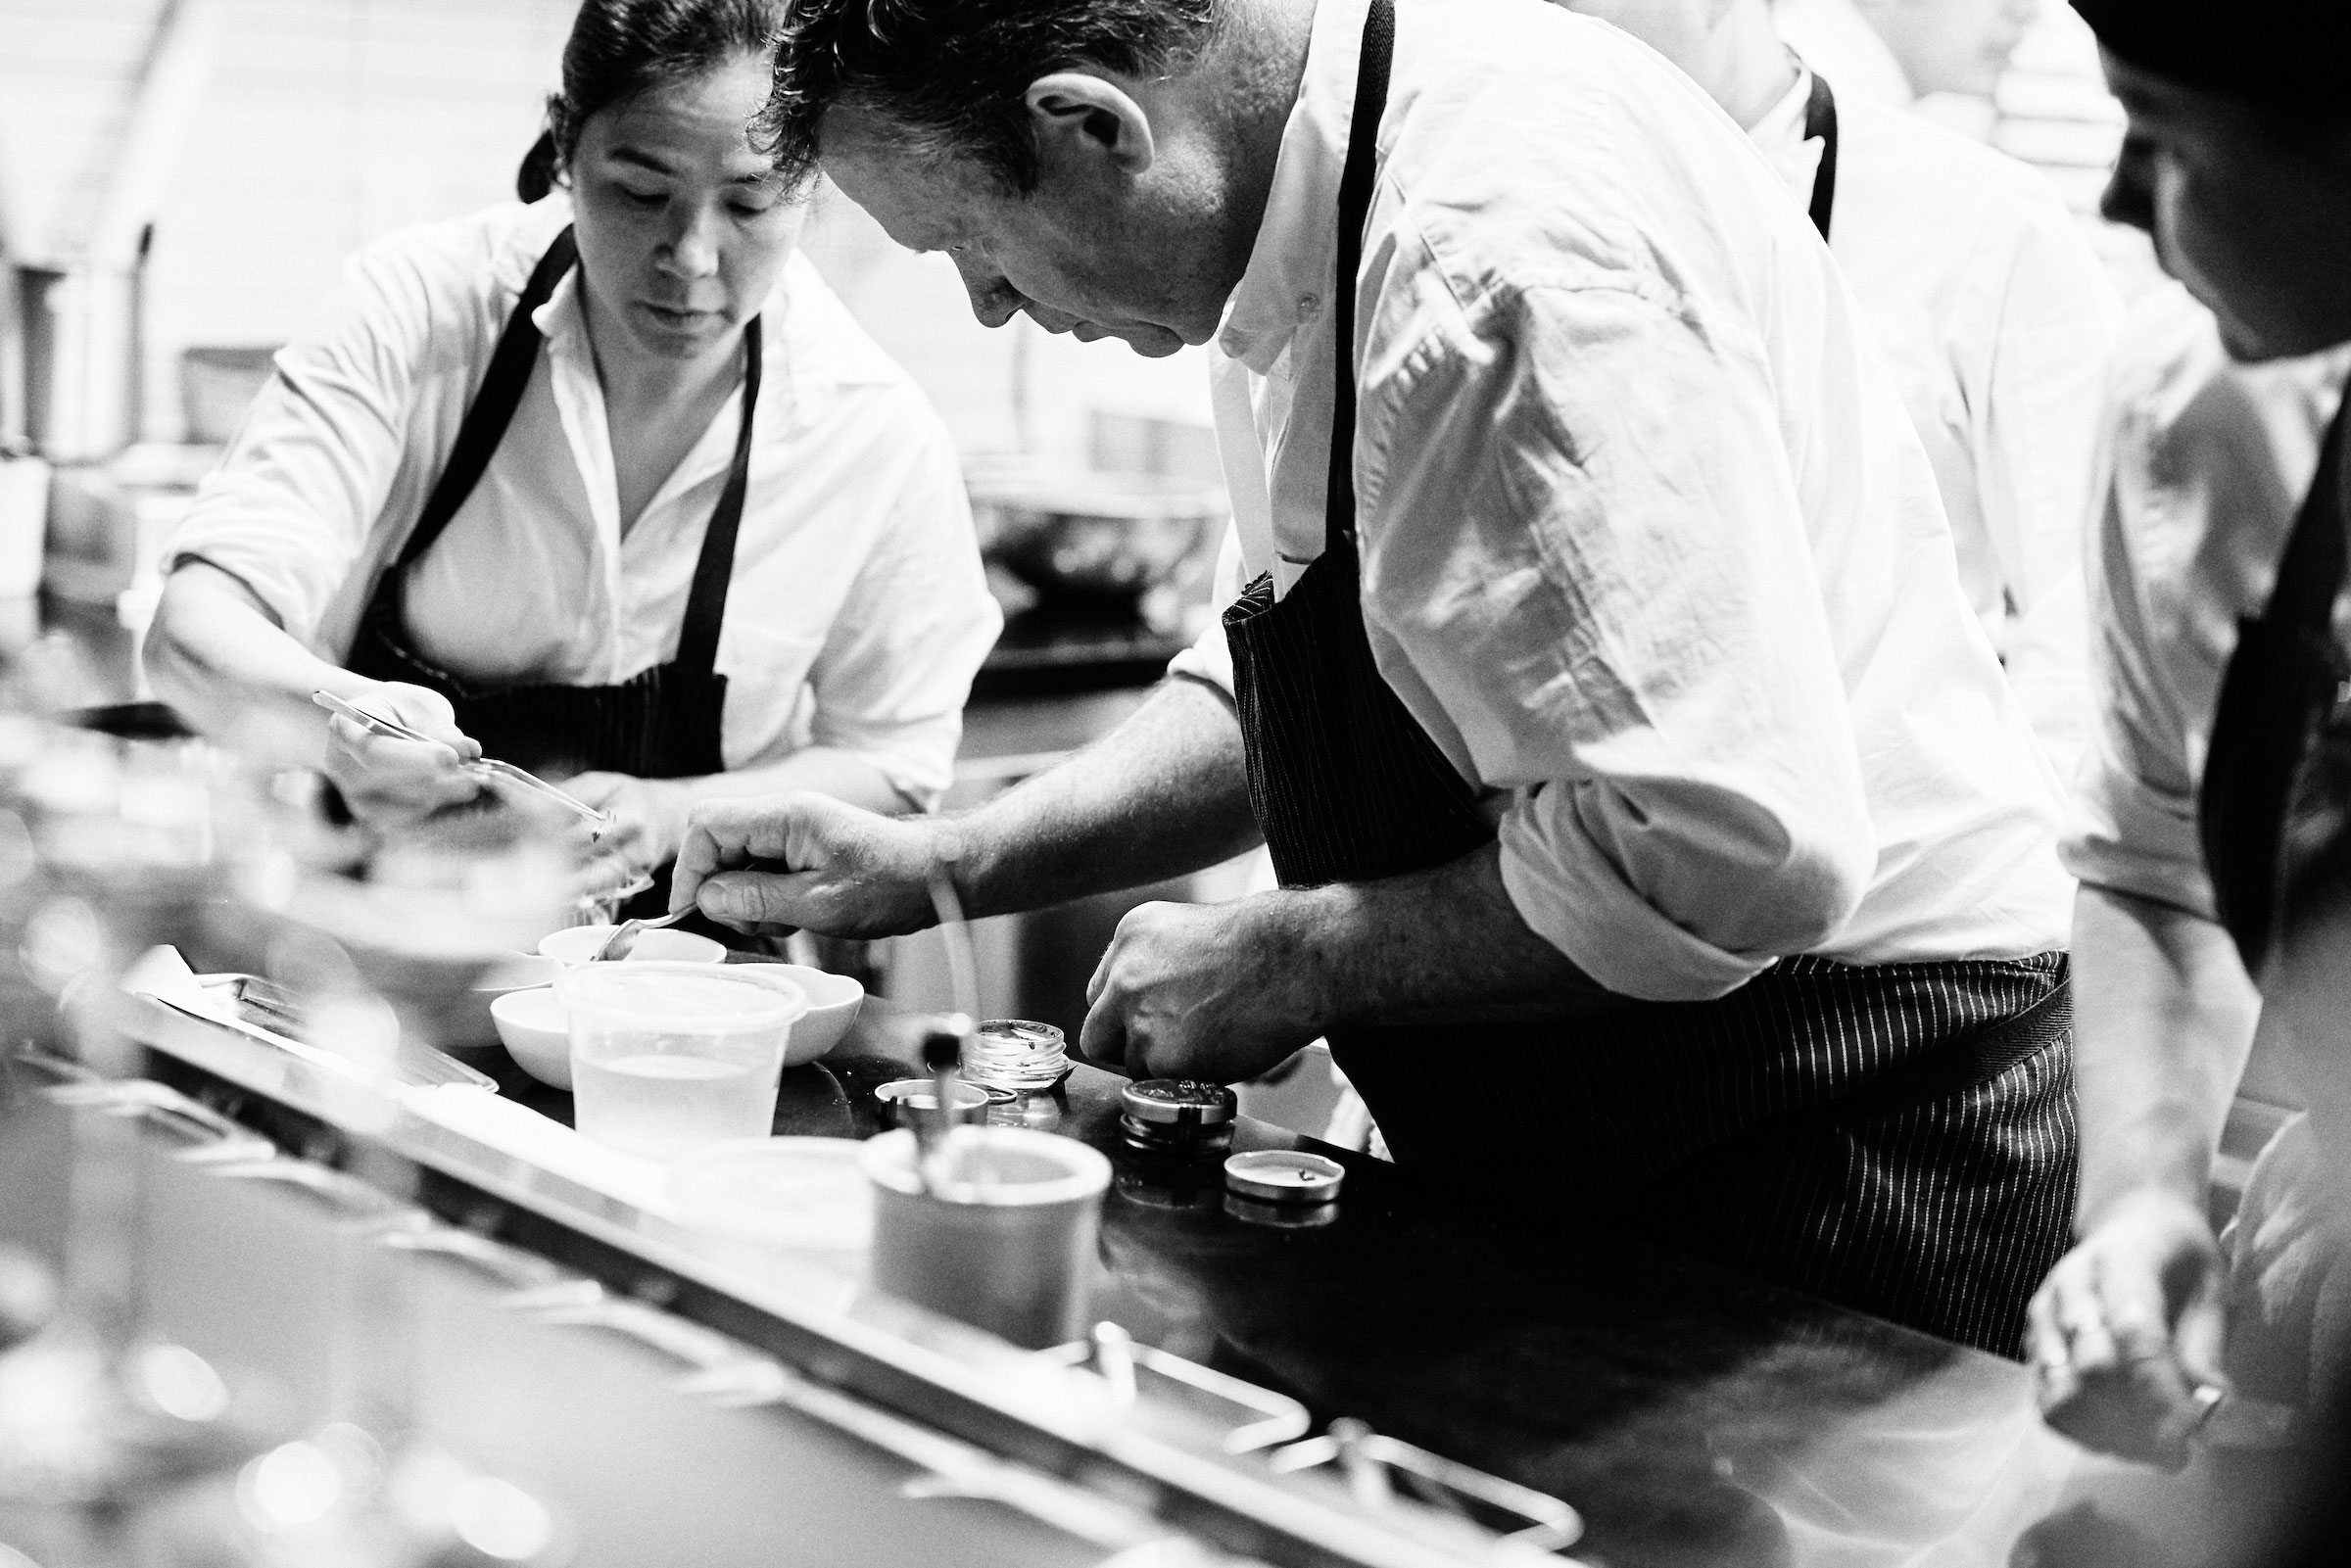 chef walter and chef margarita assembling dishes at the pass